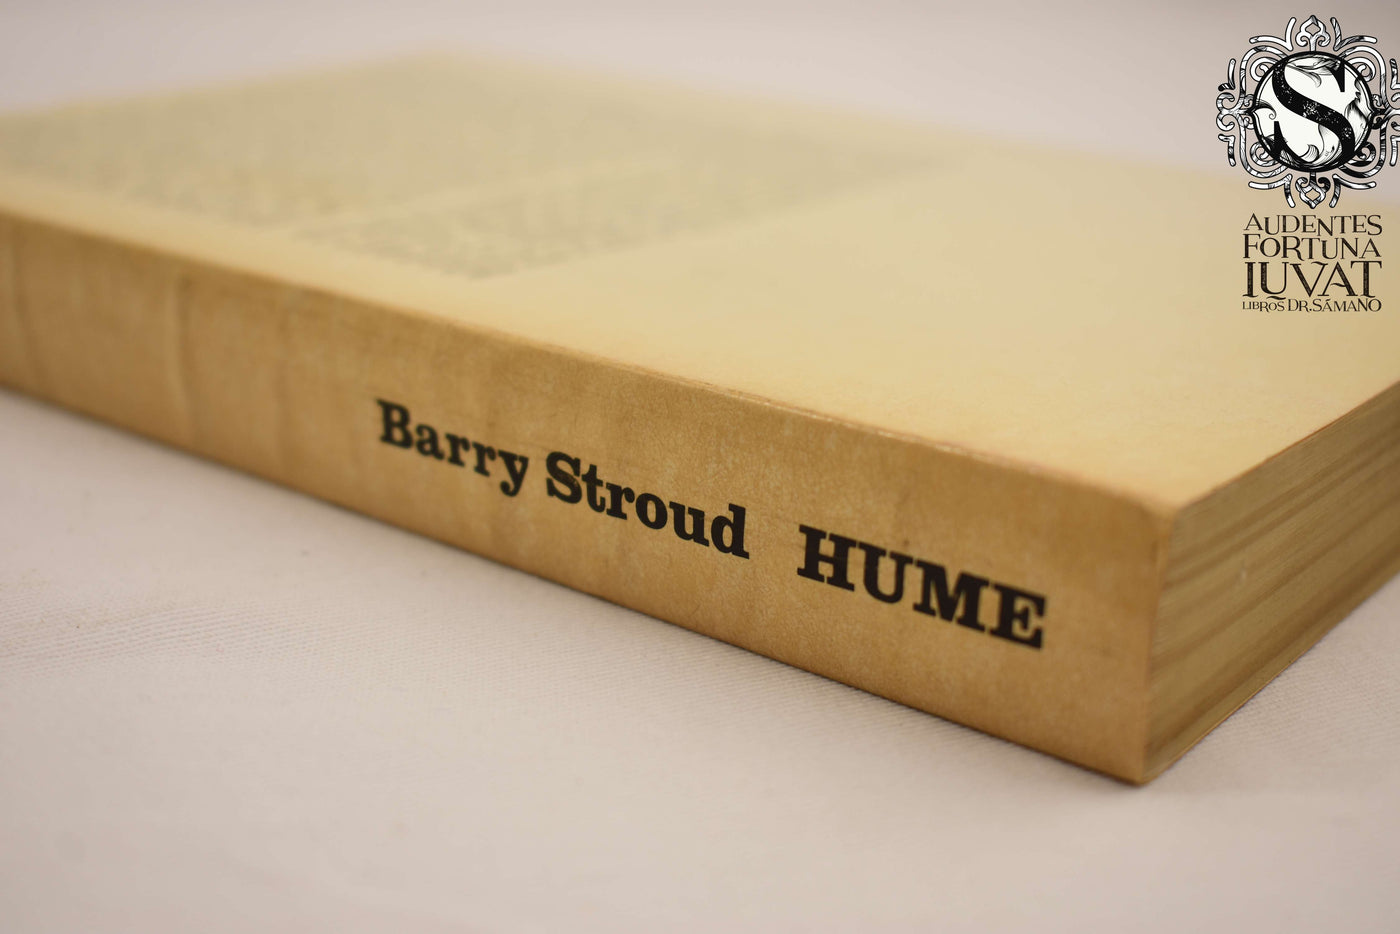 HUME  - Barry Stroud